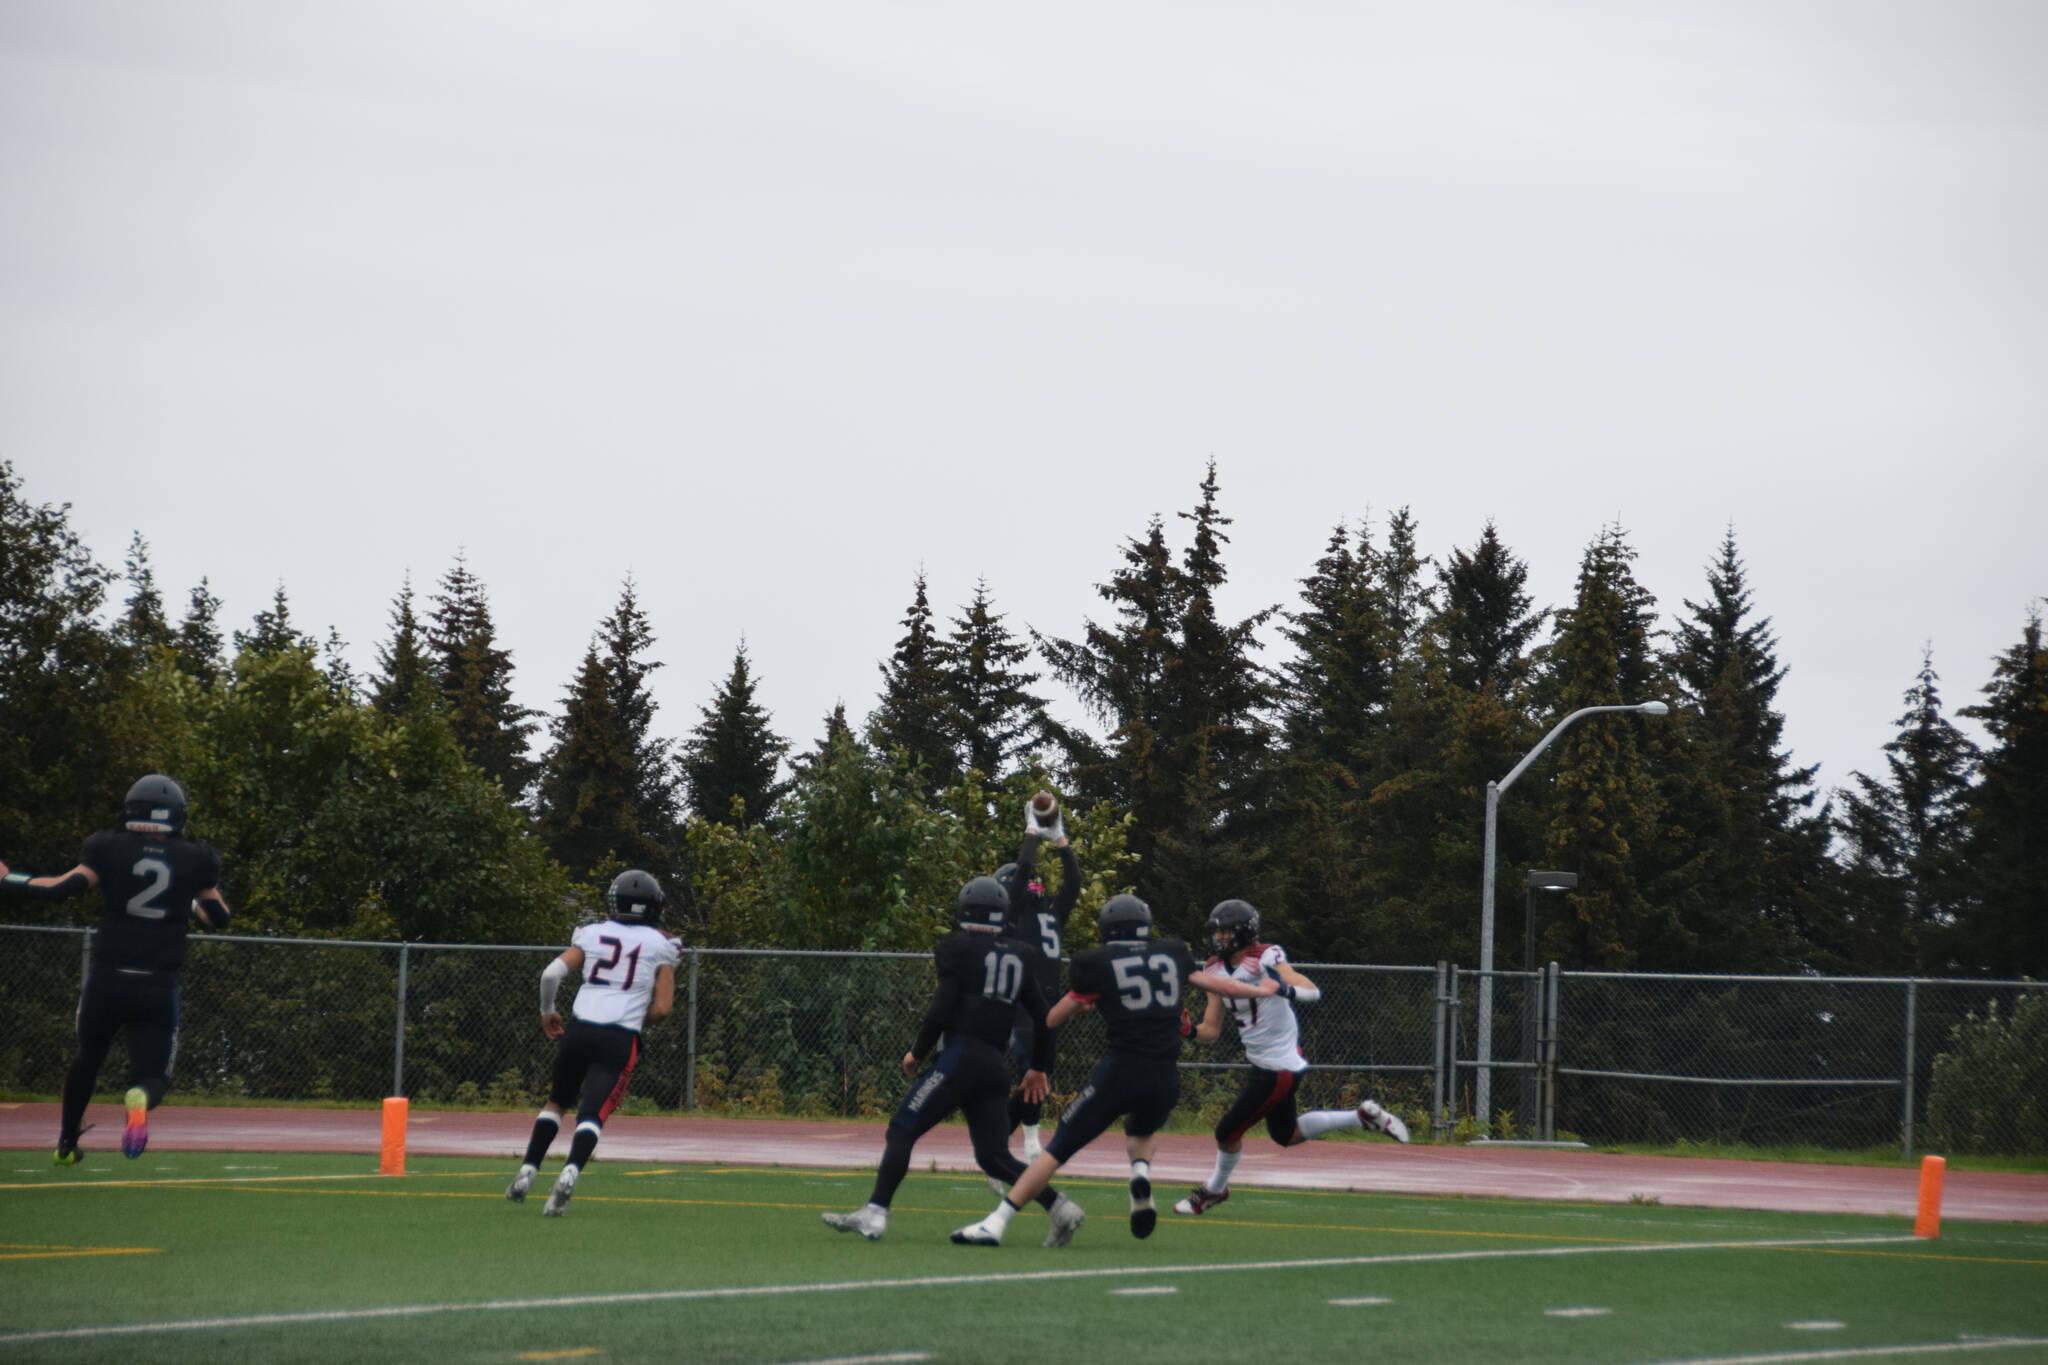 Homer defensive back Landan Branstetter intercepts a pass from Houston behind the five yard line during the varsity game against the Hawks on Saturday, Sept. 16, 2023 in Homer, Alaska. (Delcenia Cosman/Homer News)